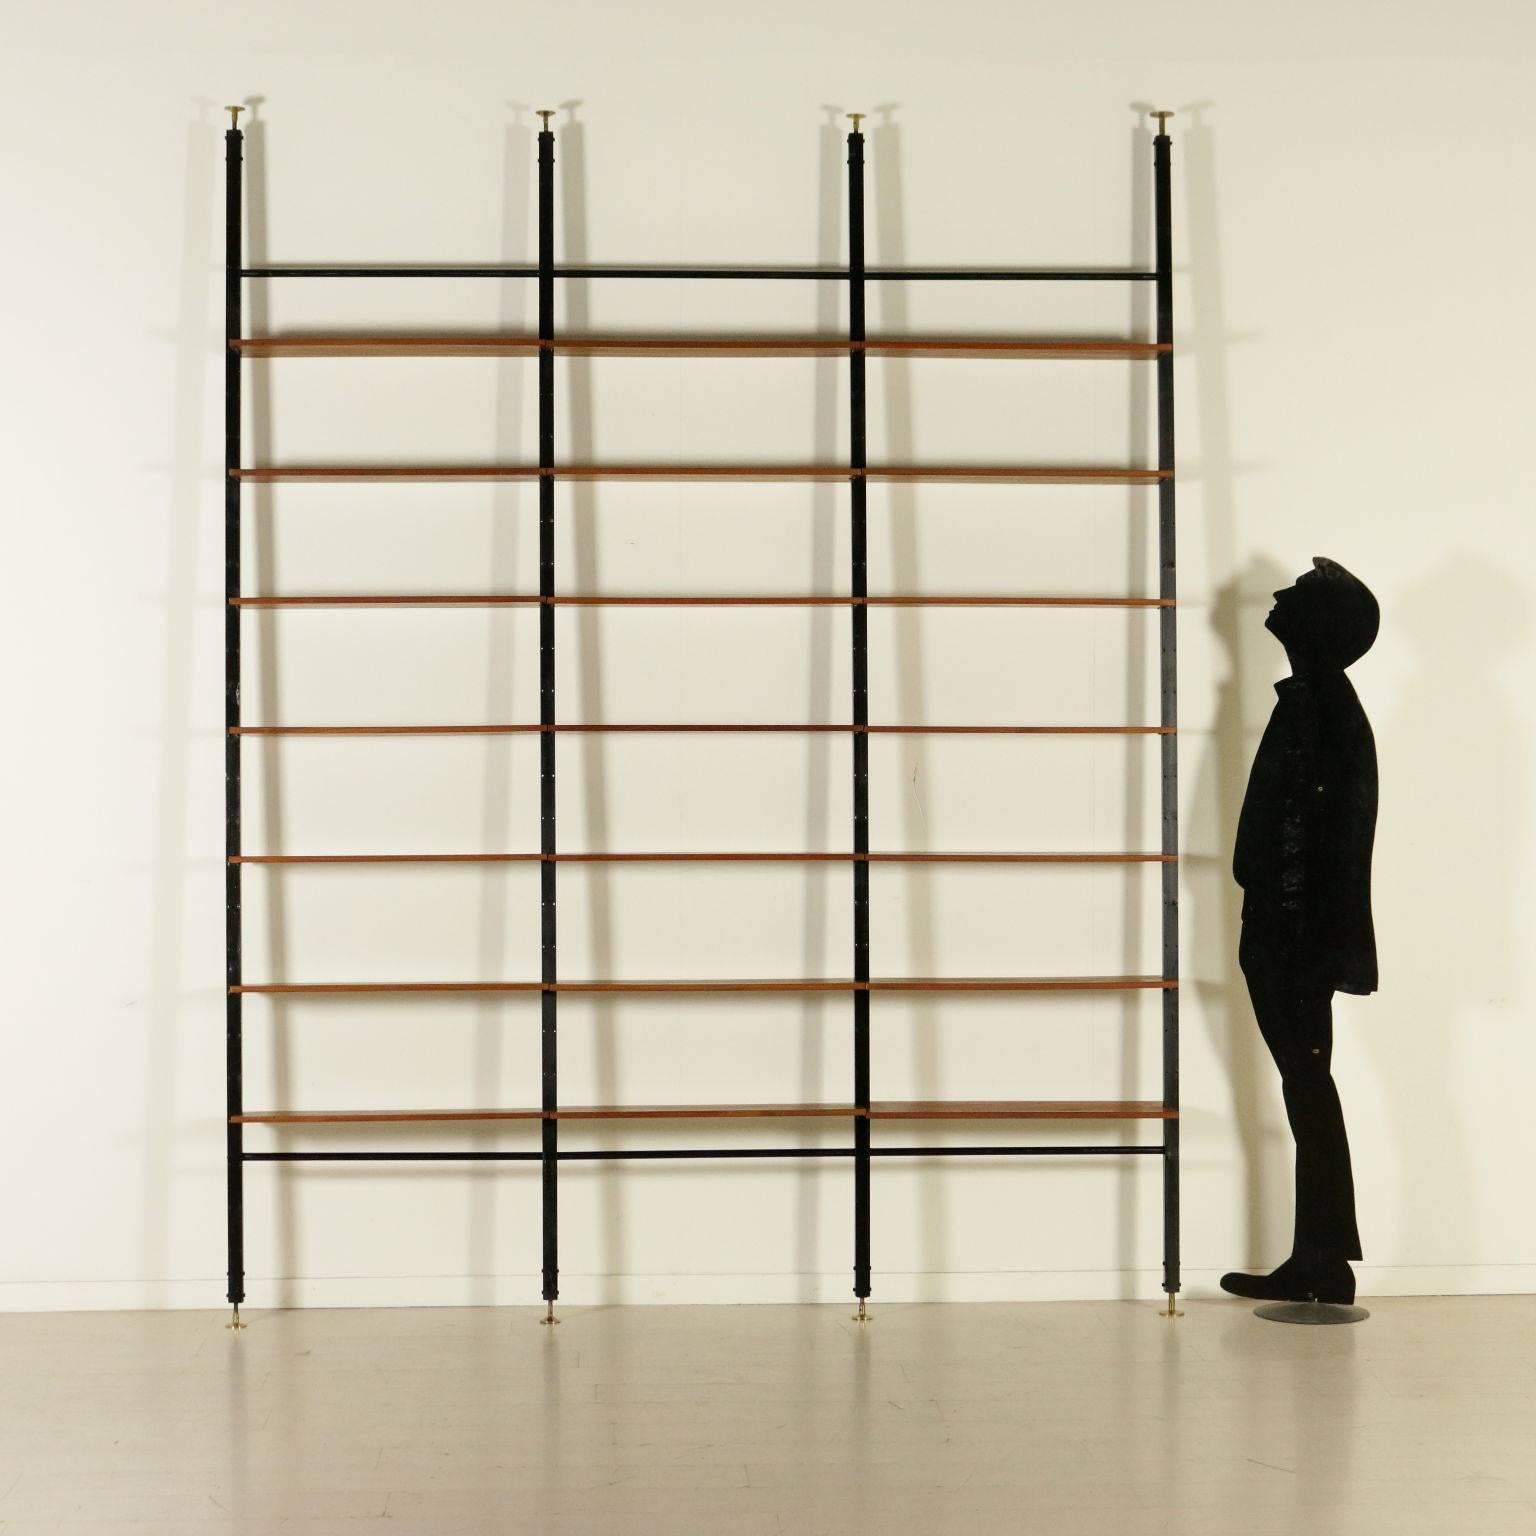 A floor-to-ceiling bookcase with extendable uprights and adjustable shelves in height. Metal uprights with brass ferrules and teak veneered shelves. Manufactured in Italy, 1950s-1960s.